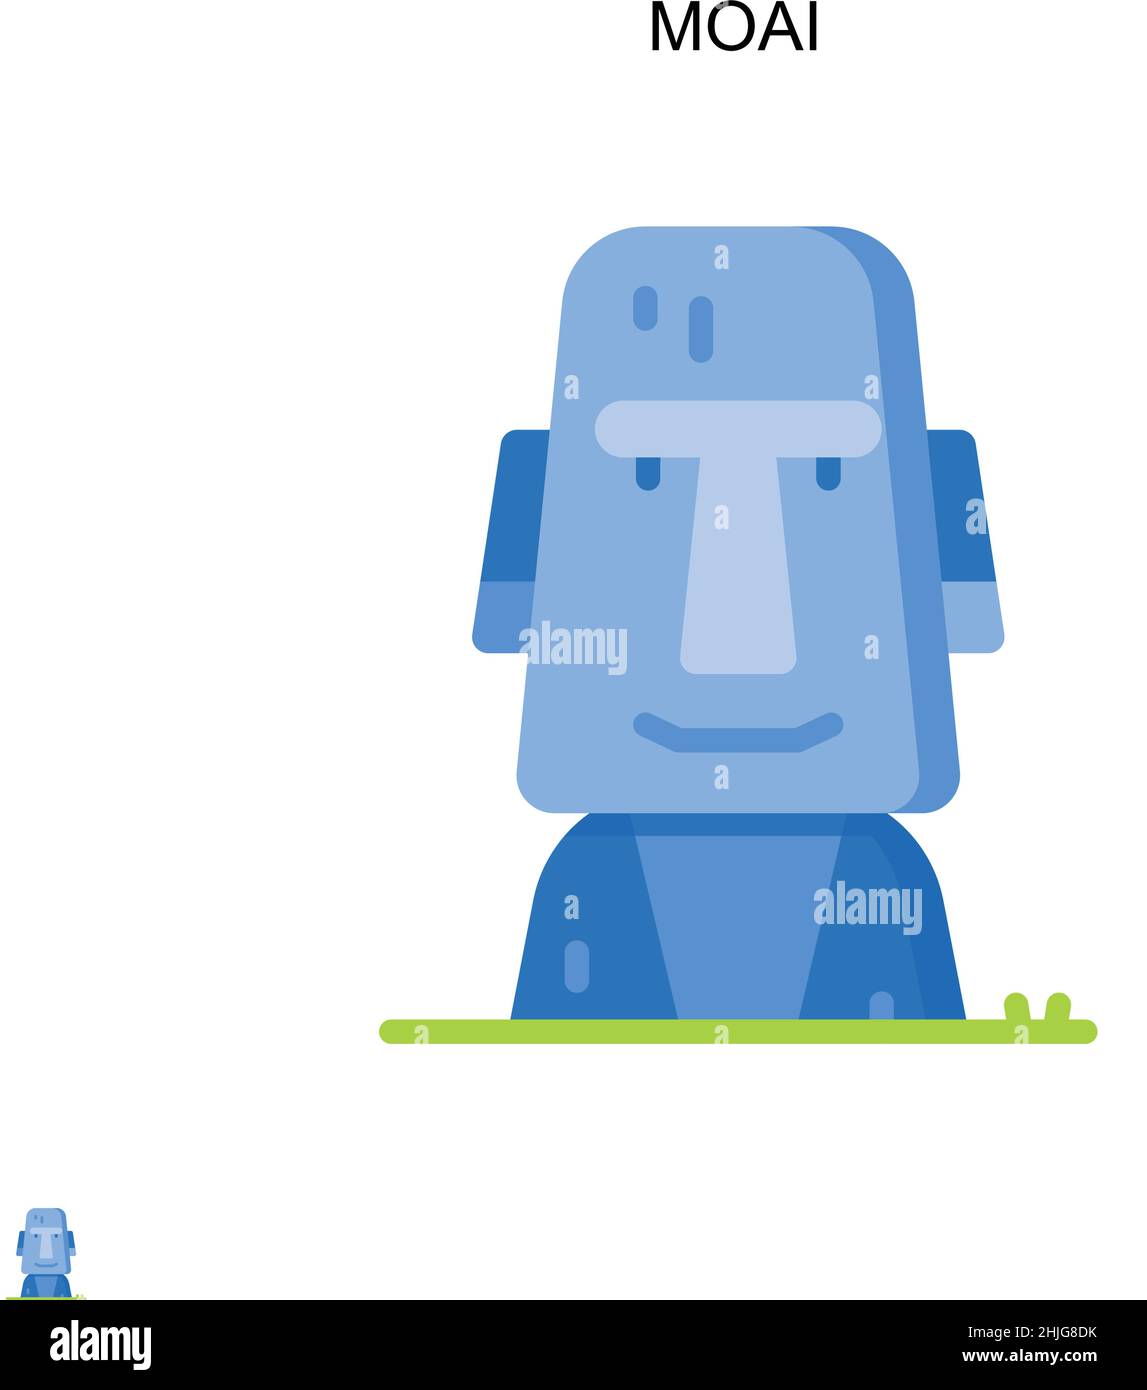 Moai Icon - Download in Line Style